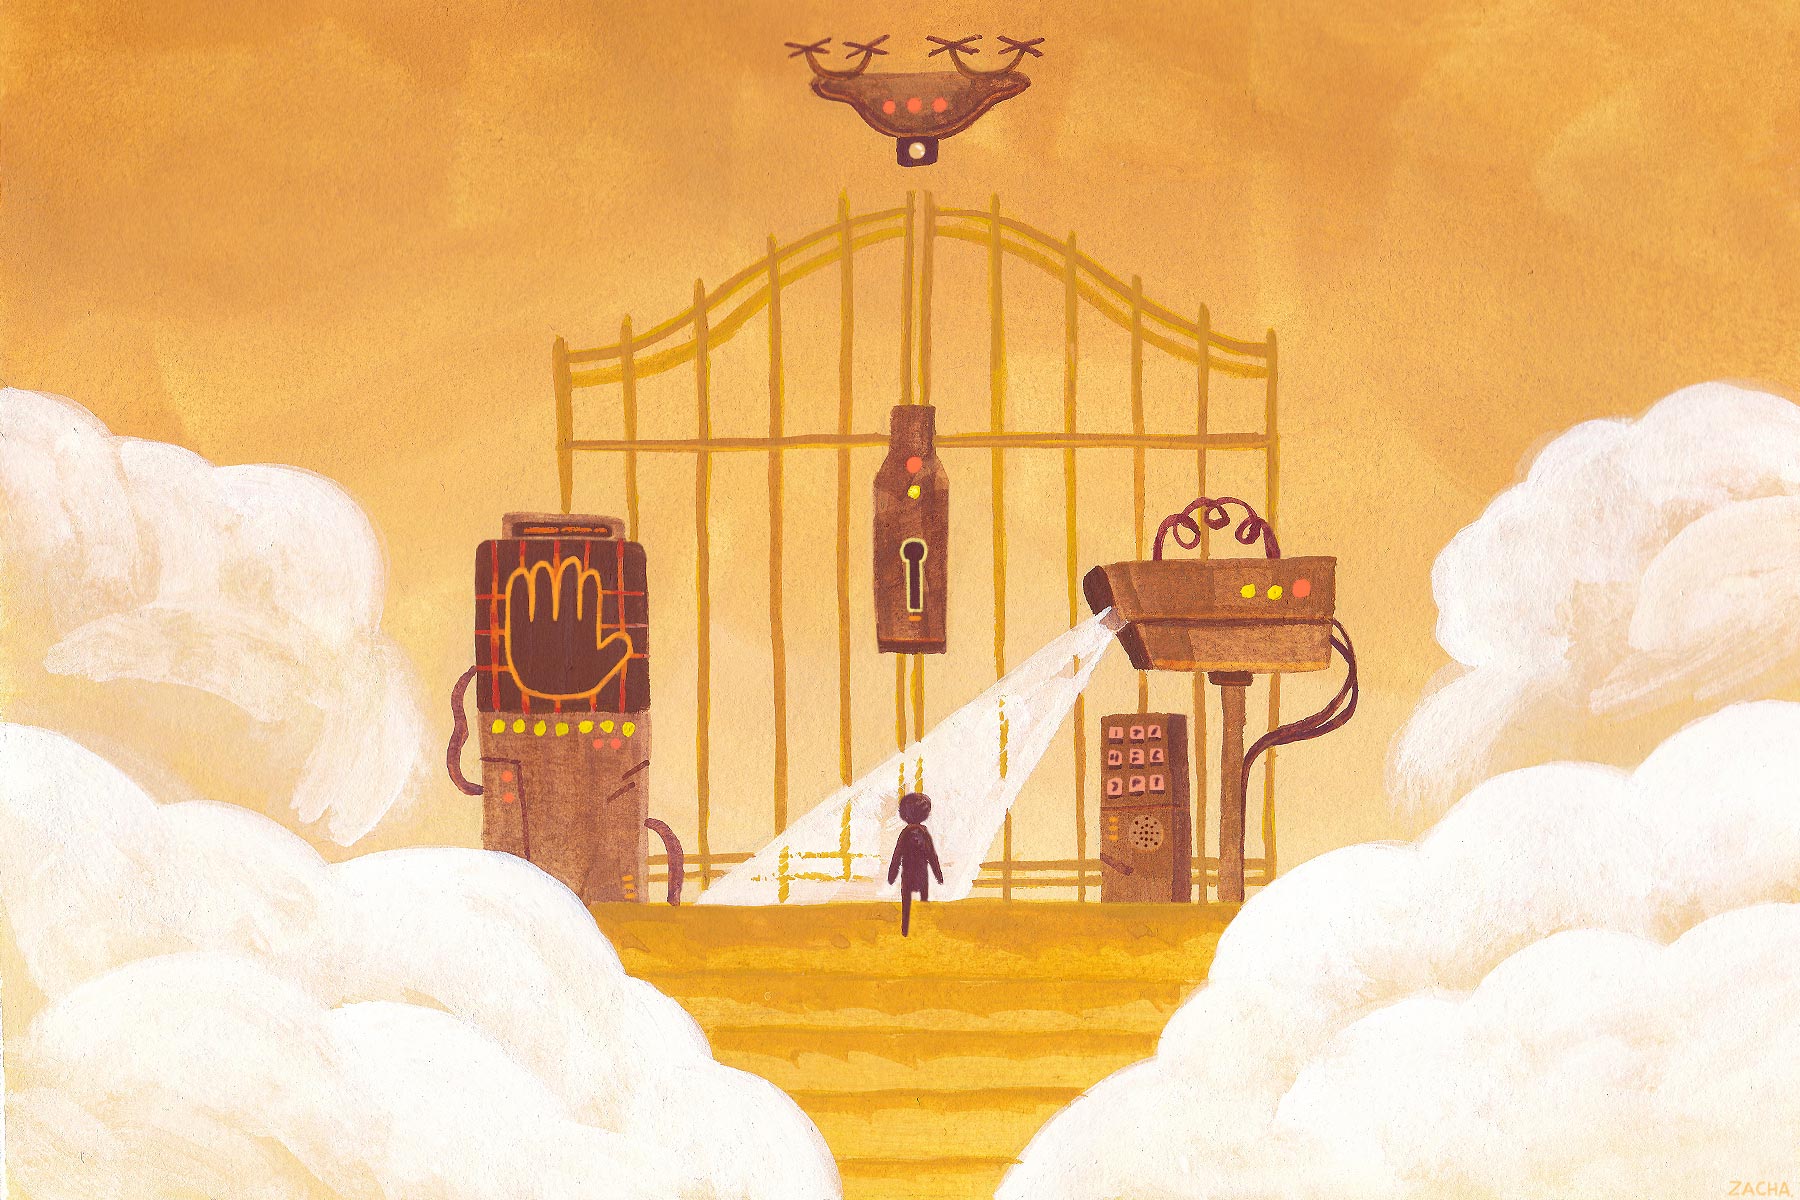 A person stands at the golden gates of heaven, with a drone hovering overhead.